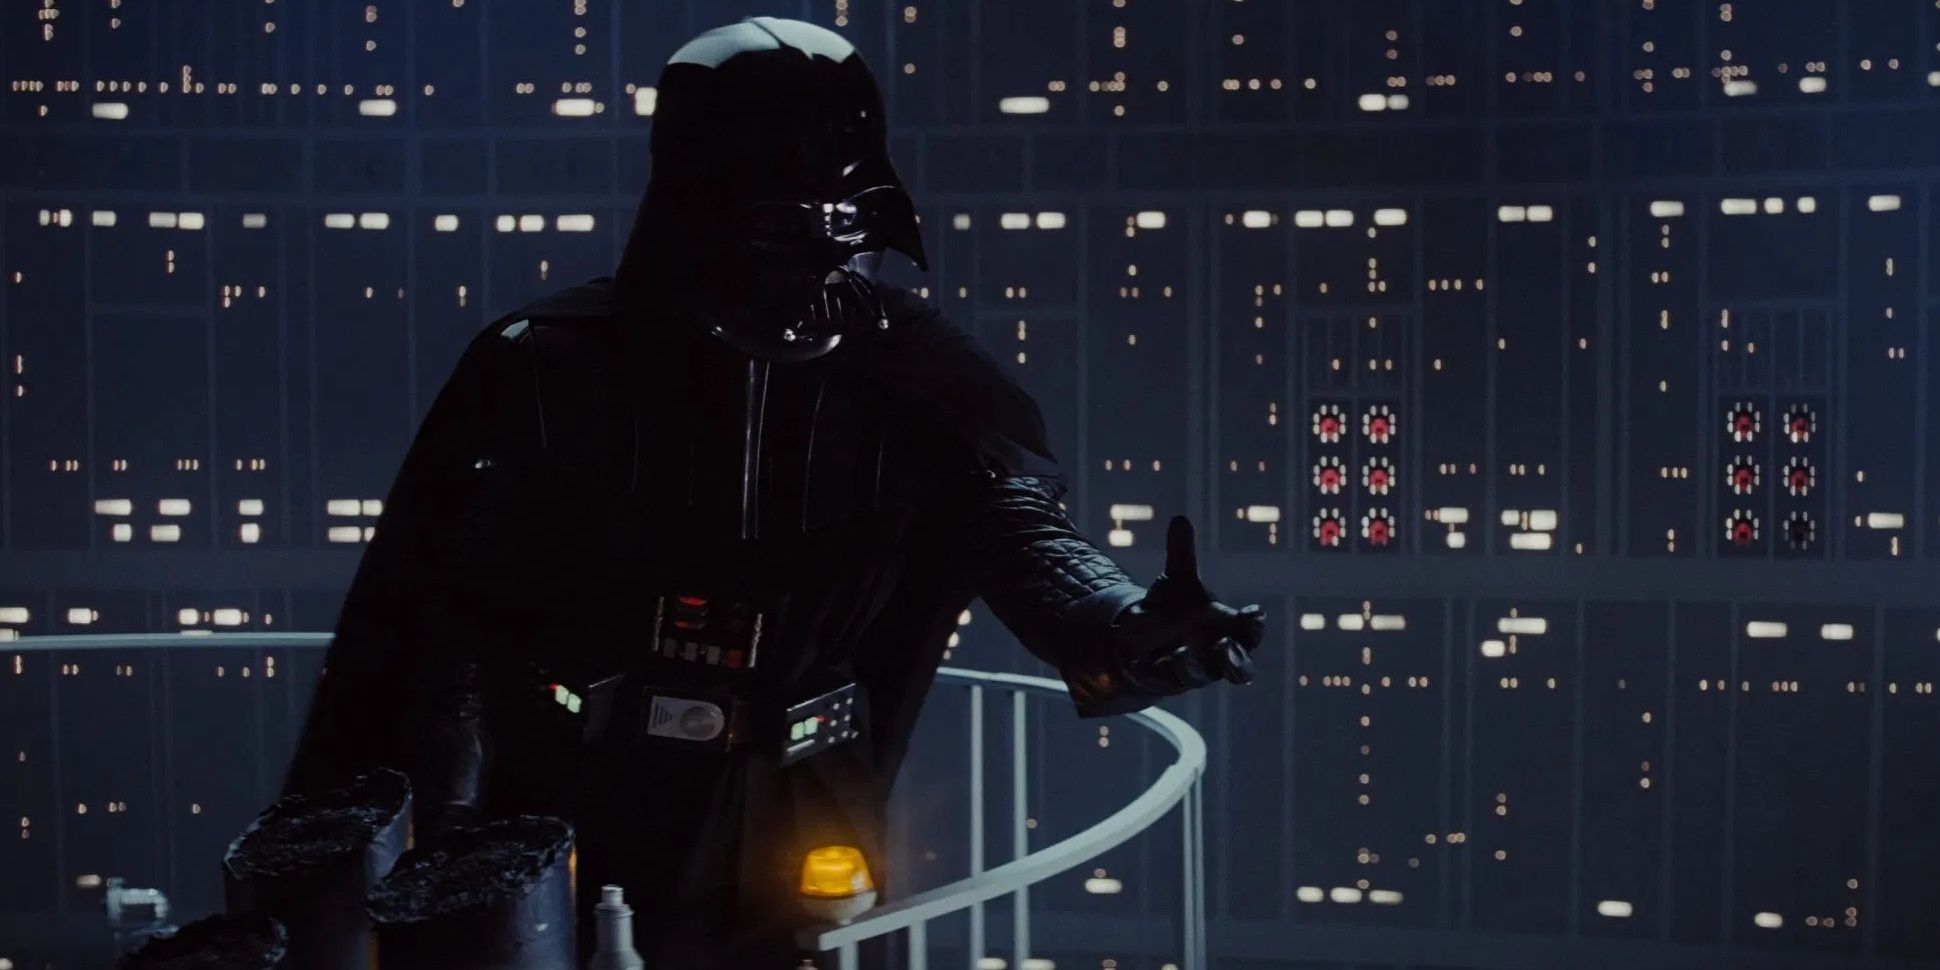 Darth Vader says 'I am your father' in The Empire Strikes Back